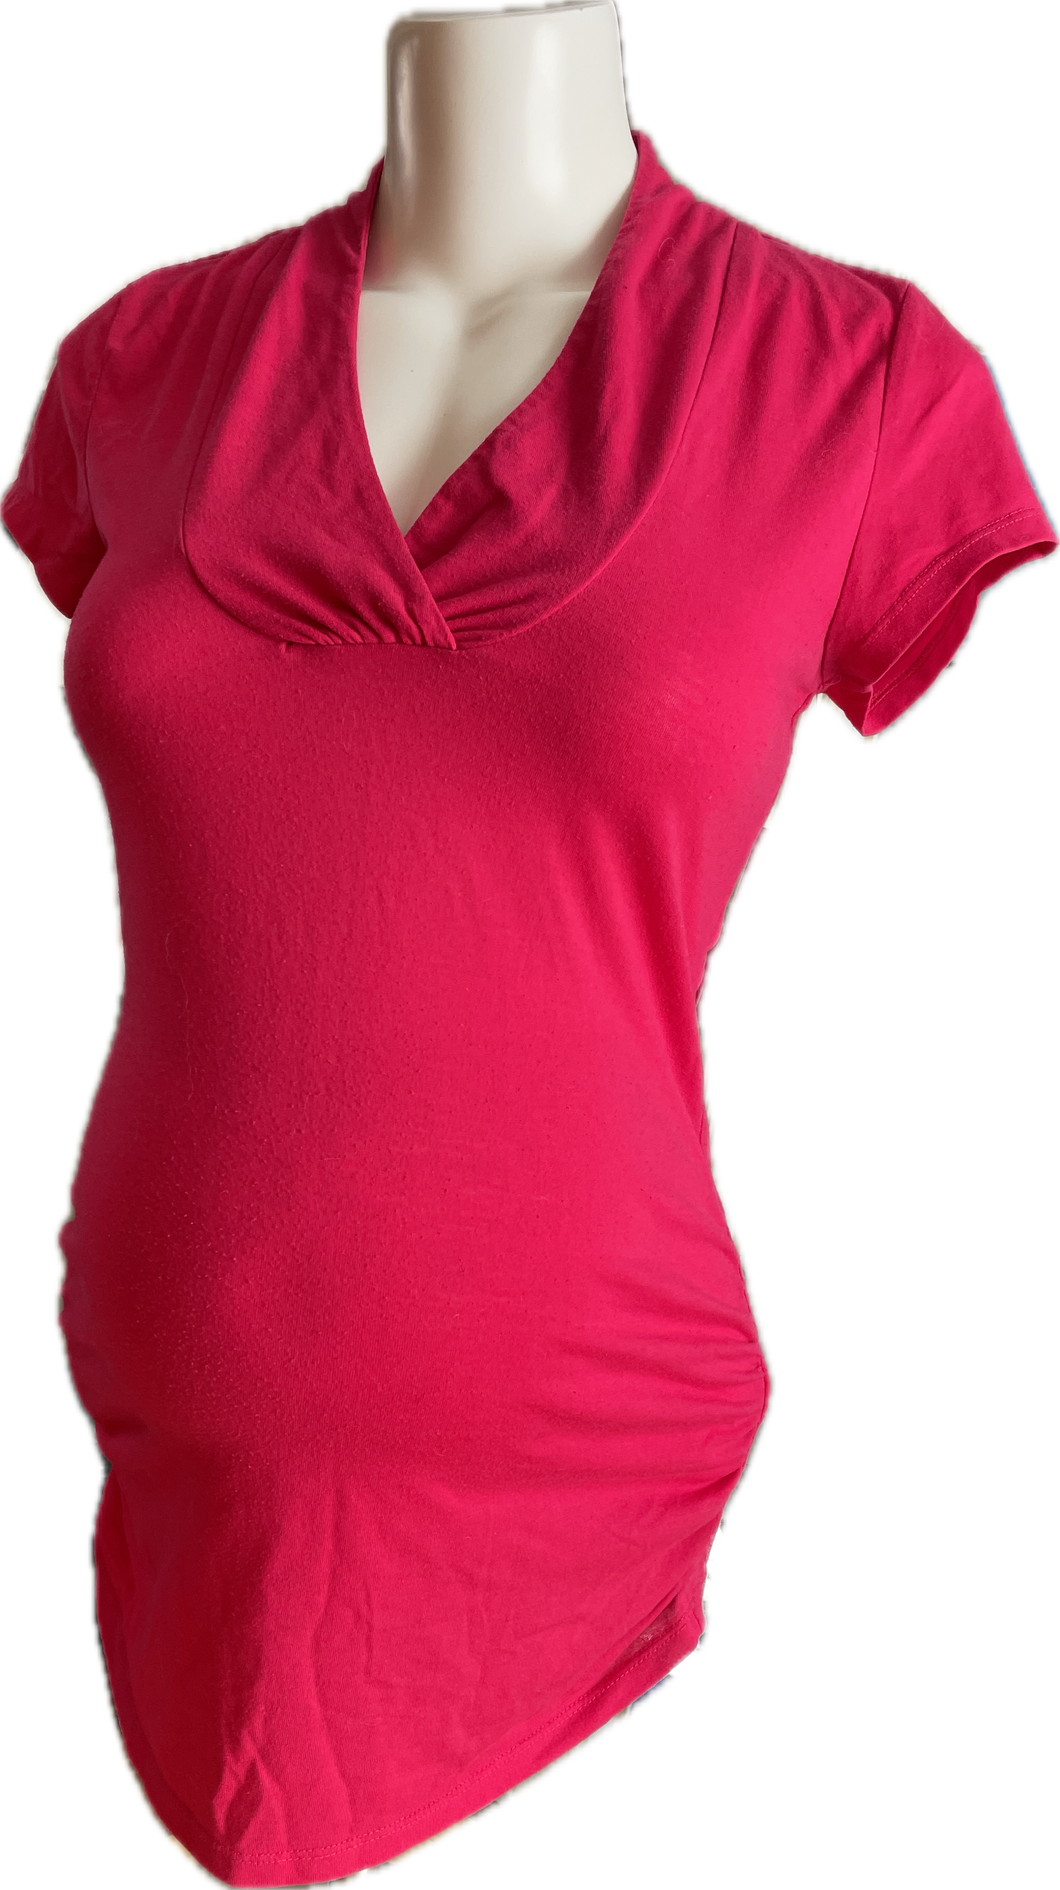 M Thyme Maternity Short Sleeve top in Pink